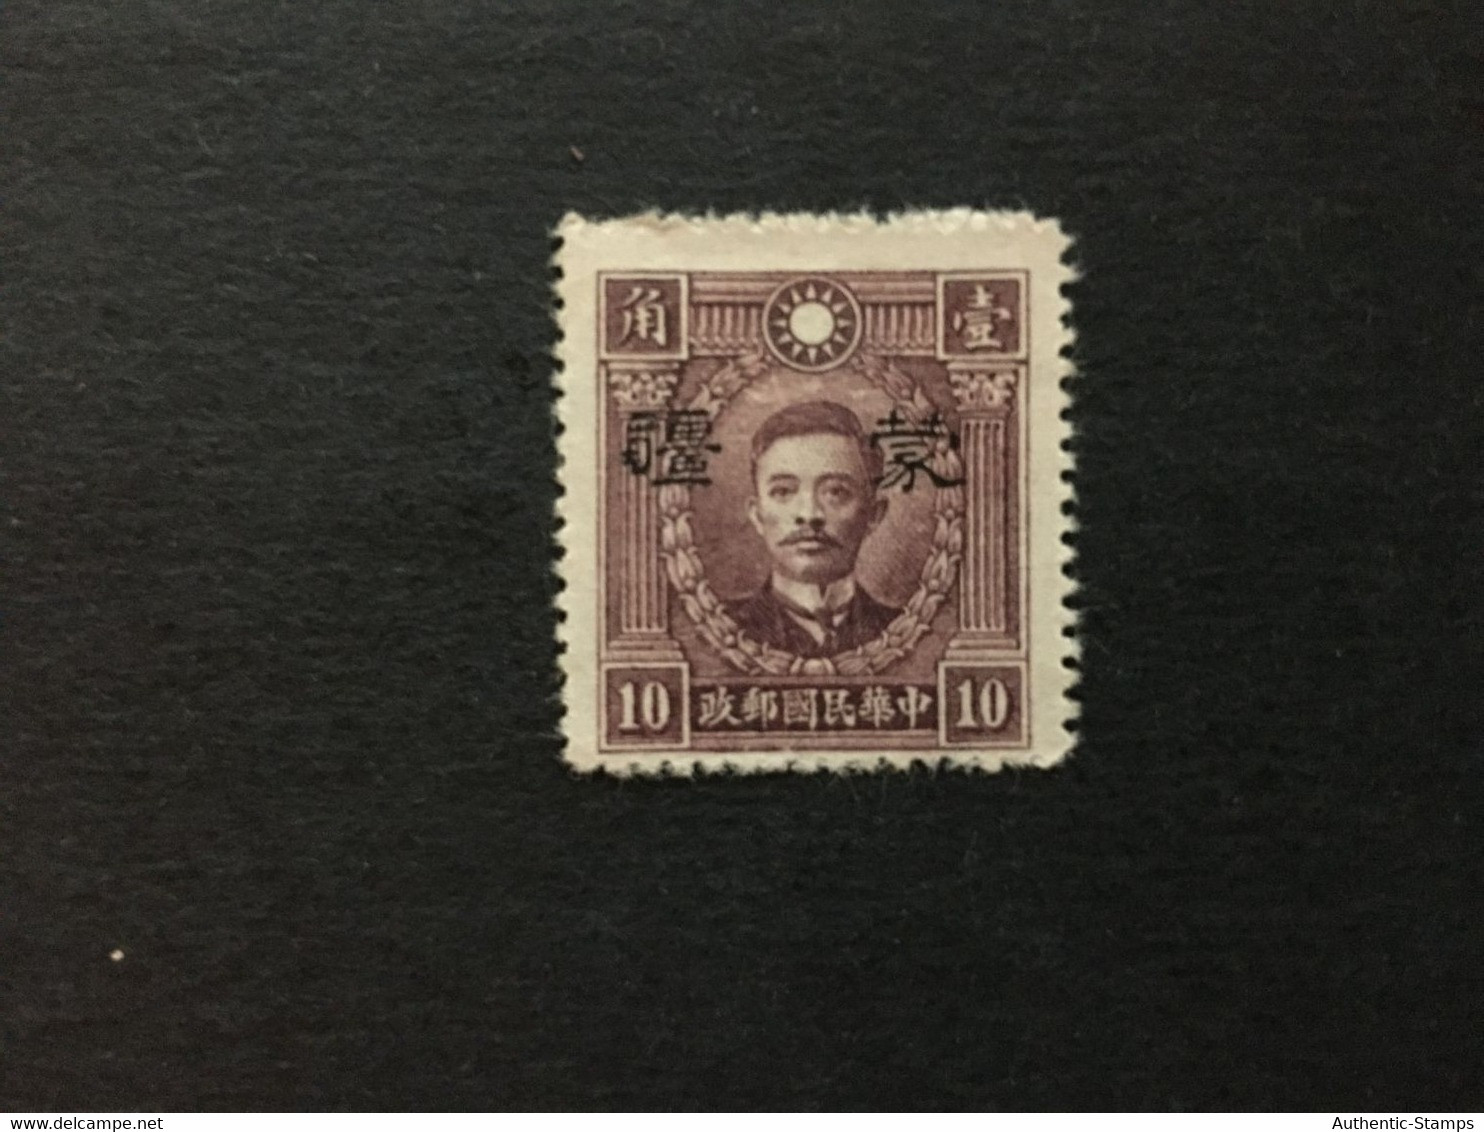 CHINA STAMP,  2 OVERPRINT STAMPS, UnUSED, TIMBRO, STEMPEL, CINA, CHINE, LIST 5561 - 1941-45 Cina Del Nord